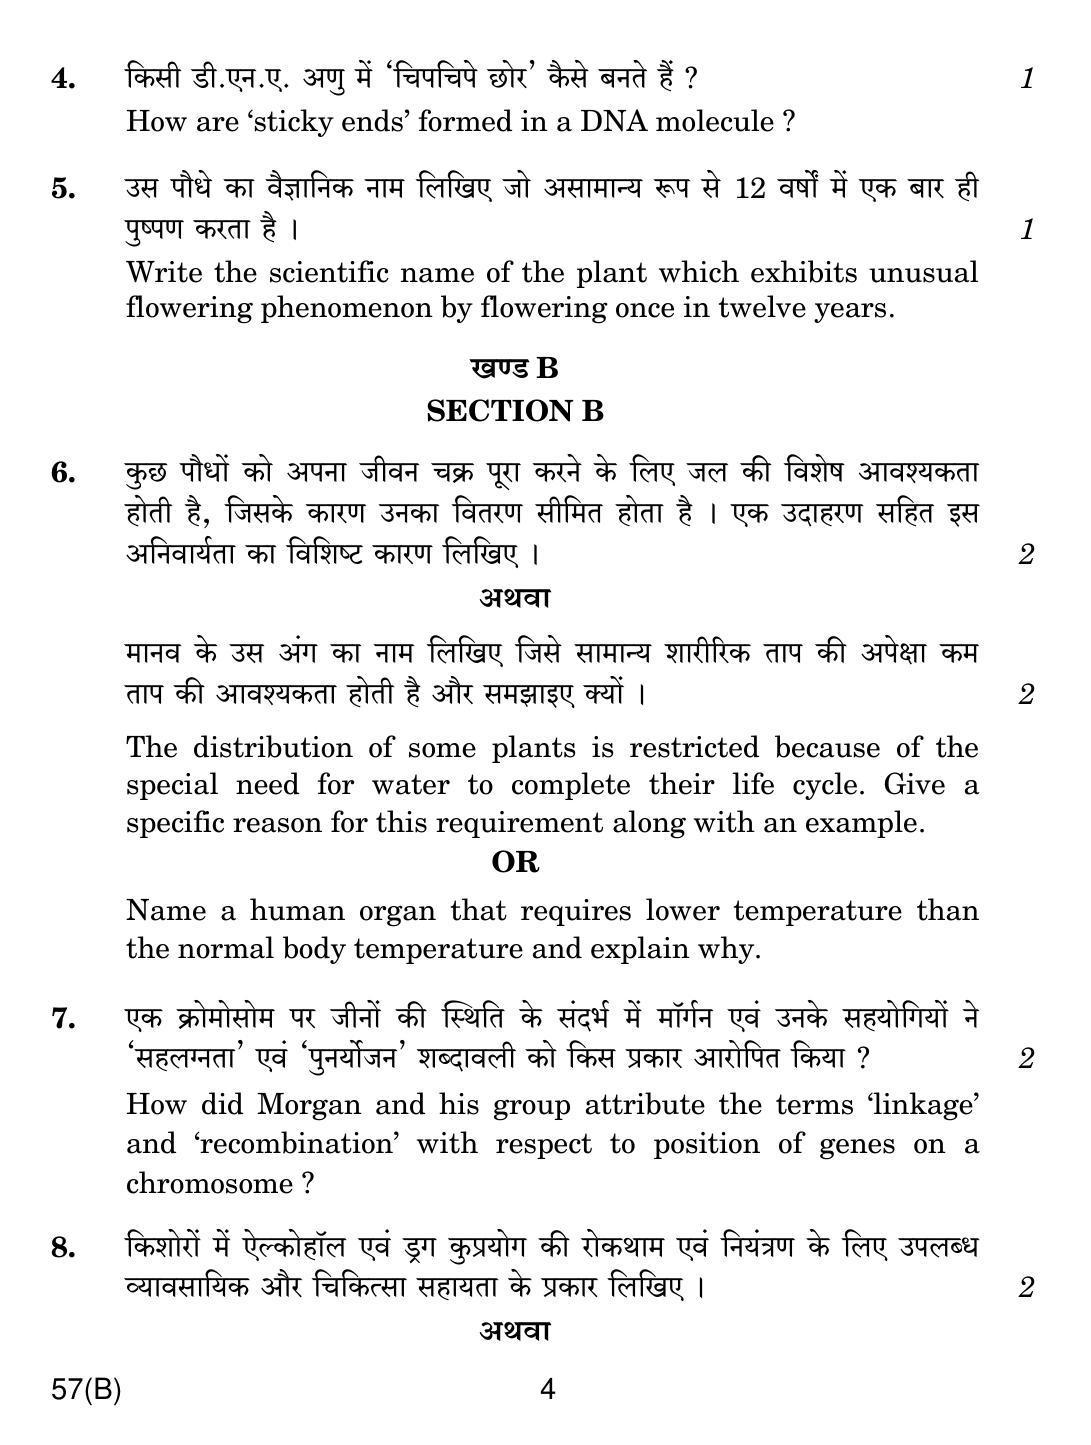 CBSE Class 12 57(B) Biology For Blind 2019 Question Paper - Page 4